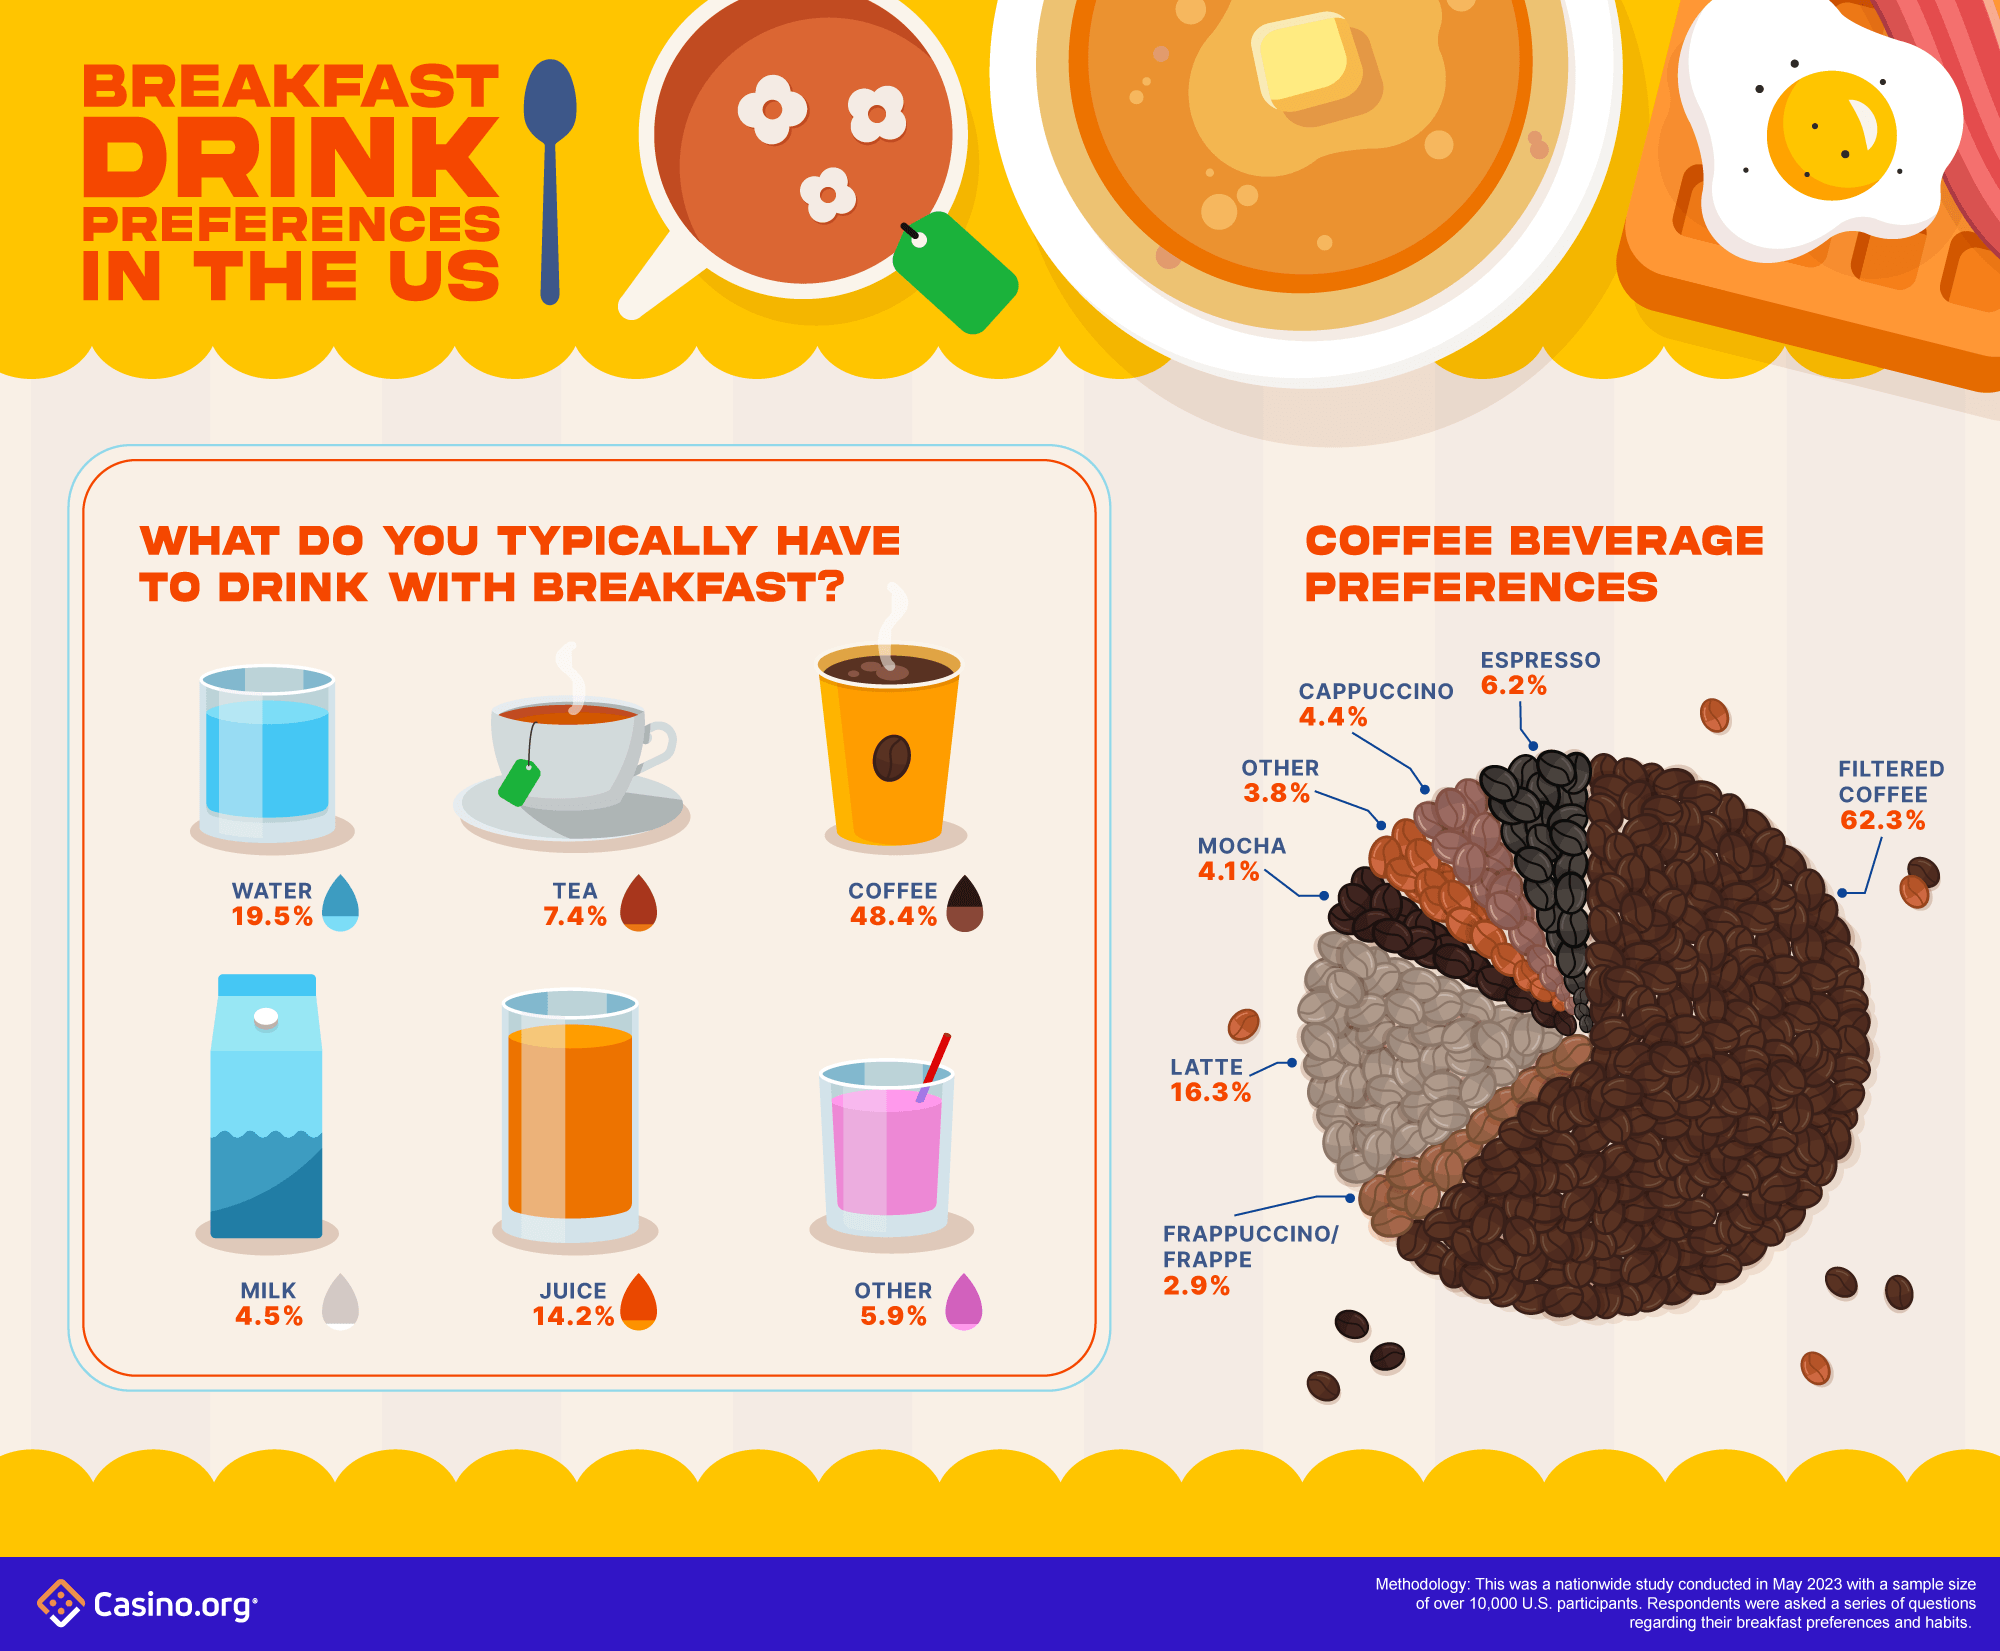 Breakfast Drink Preferences in the US